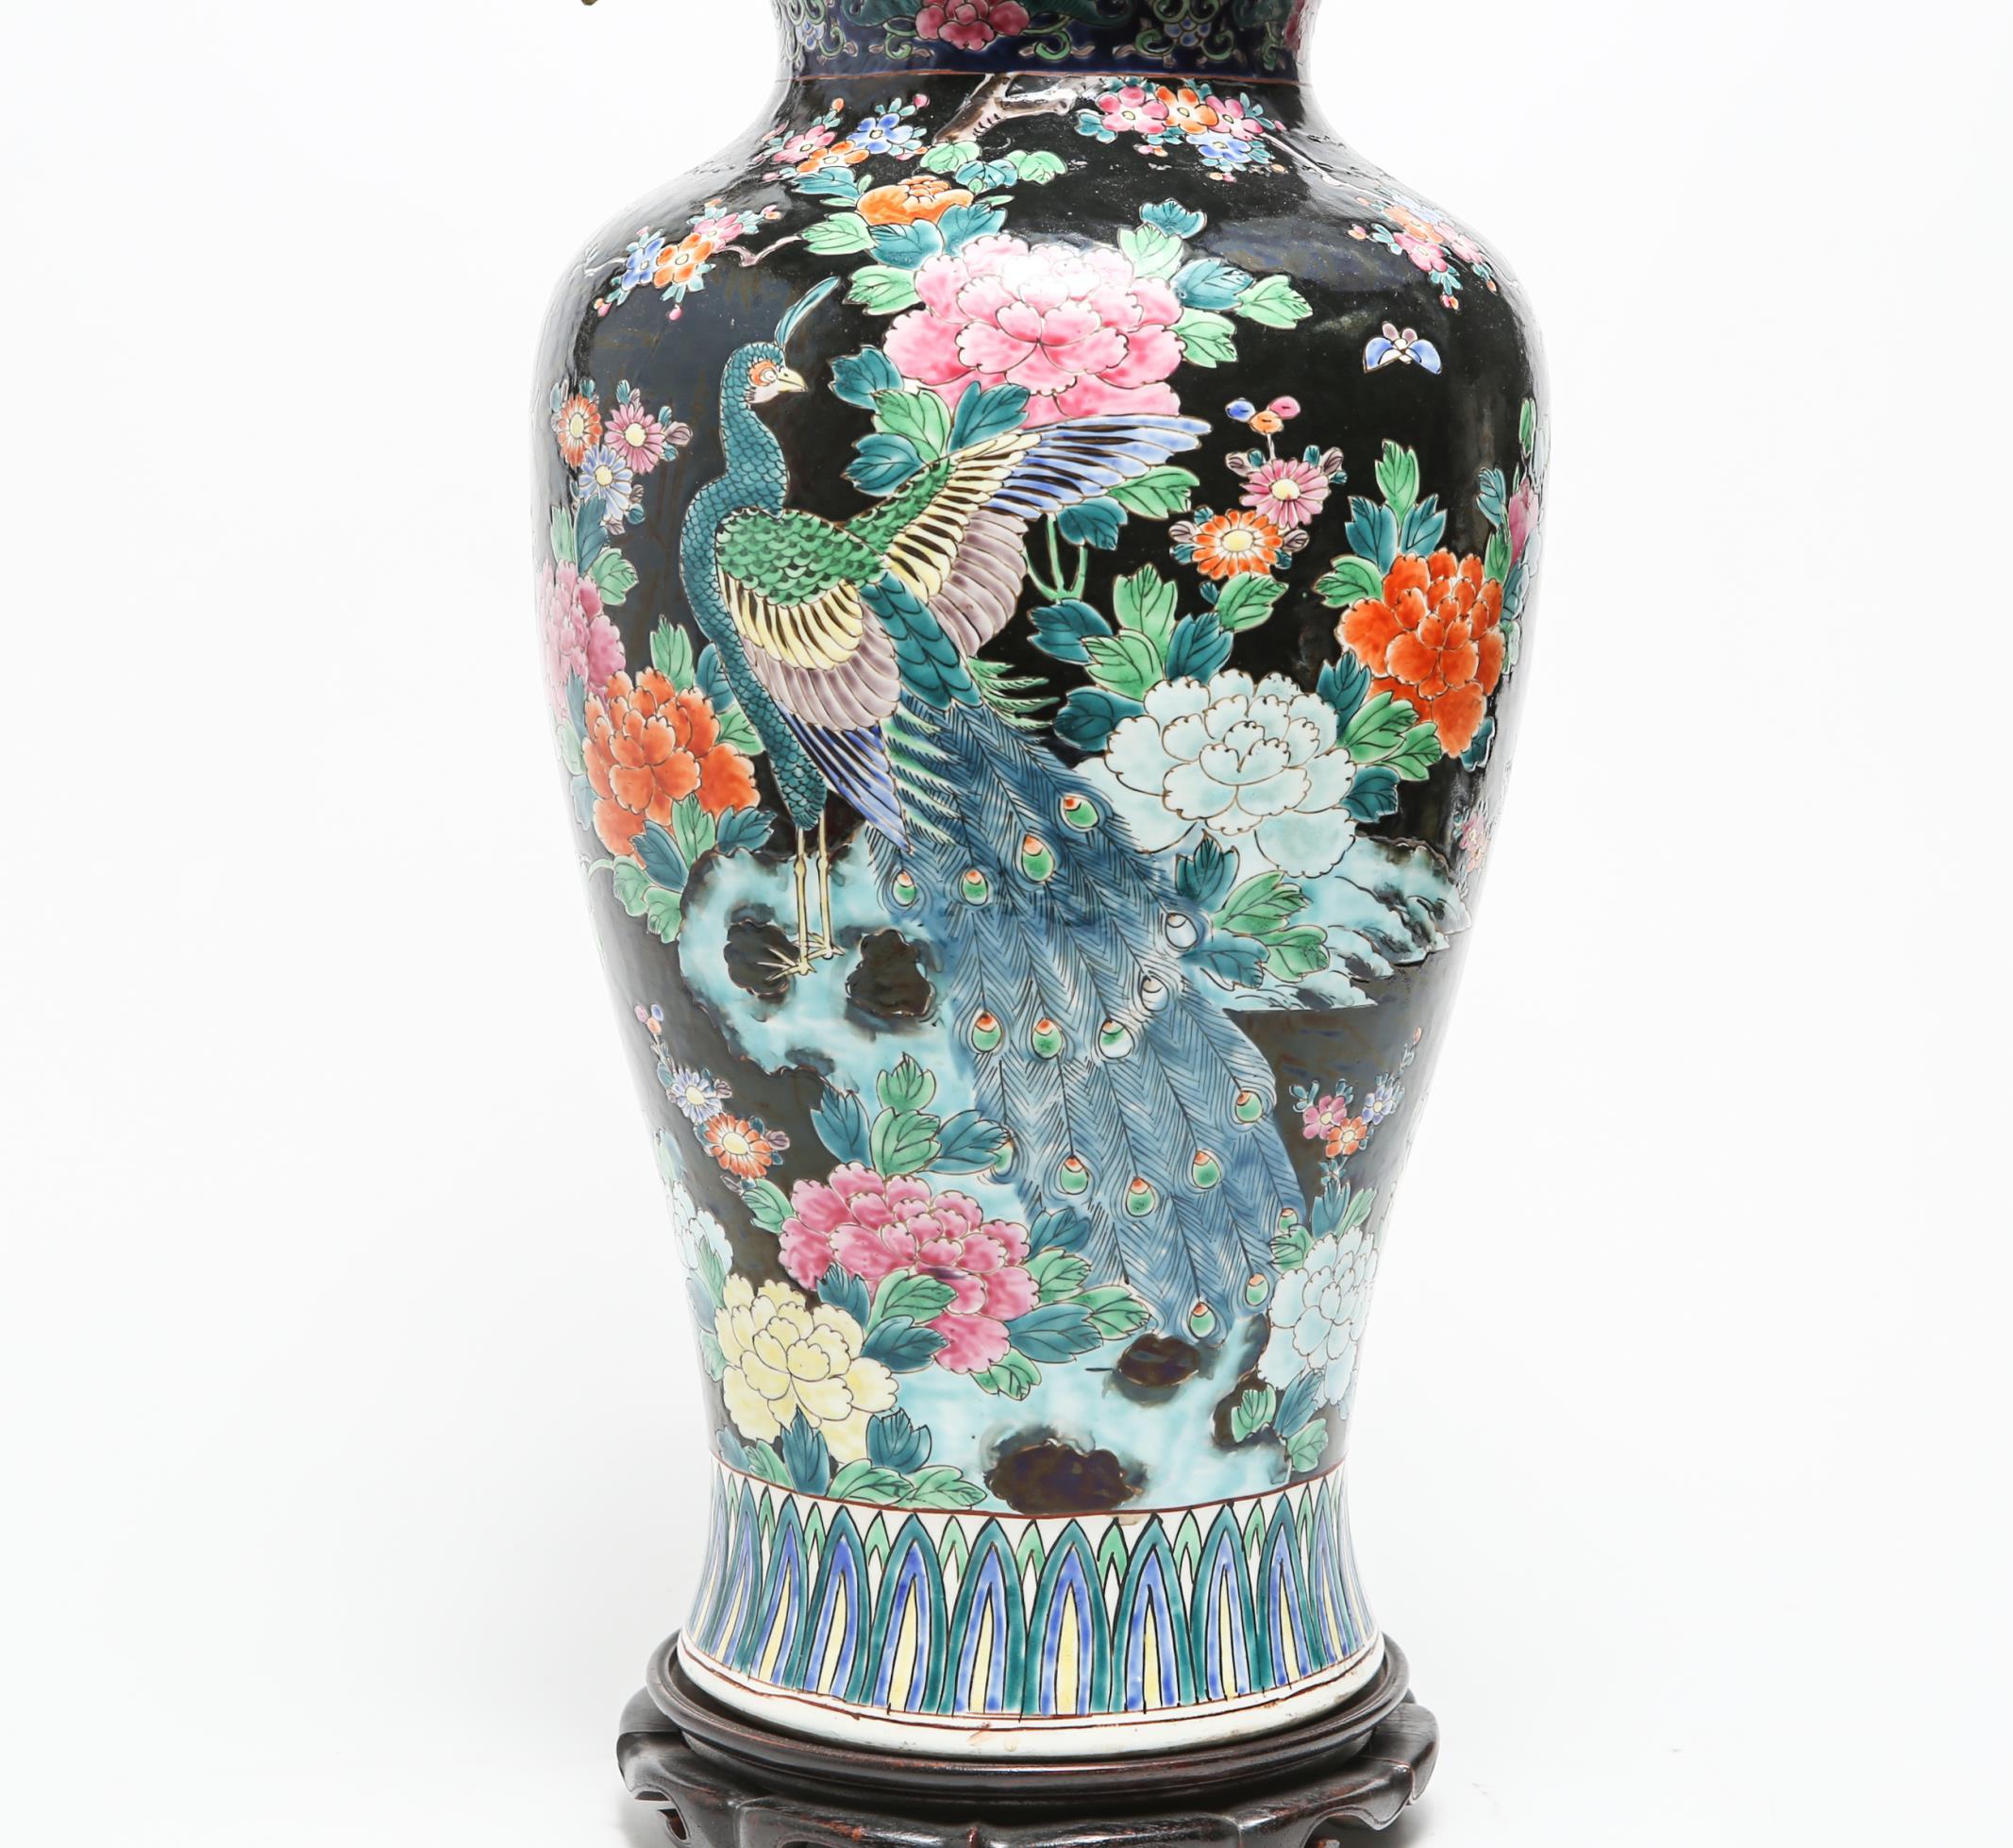 Chinese Export Chinese Famille Noire Porcelain Floral Motif Balluster Jar Mounted as Table Lamp